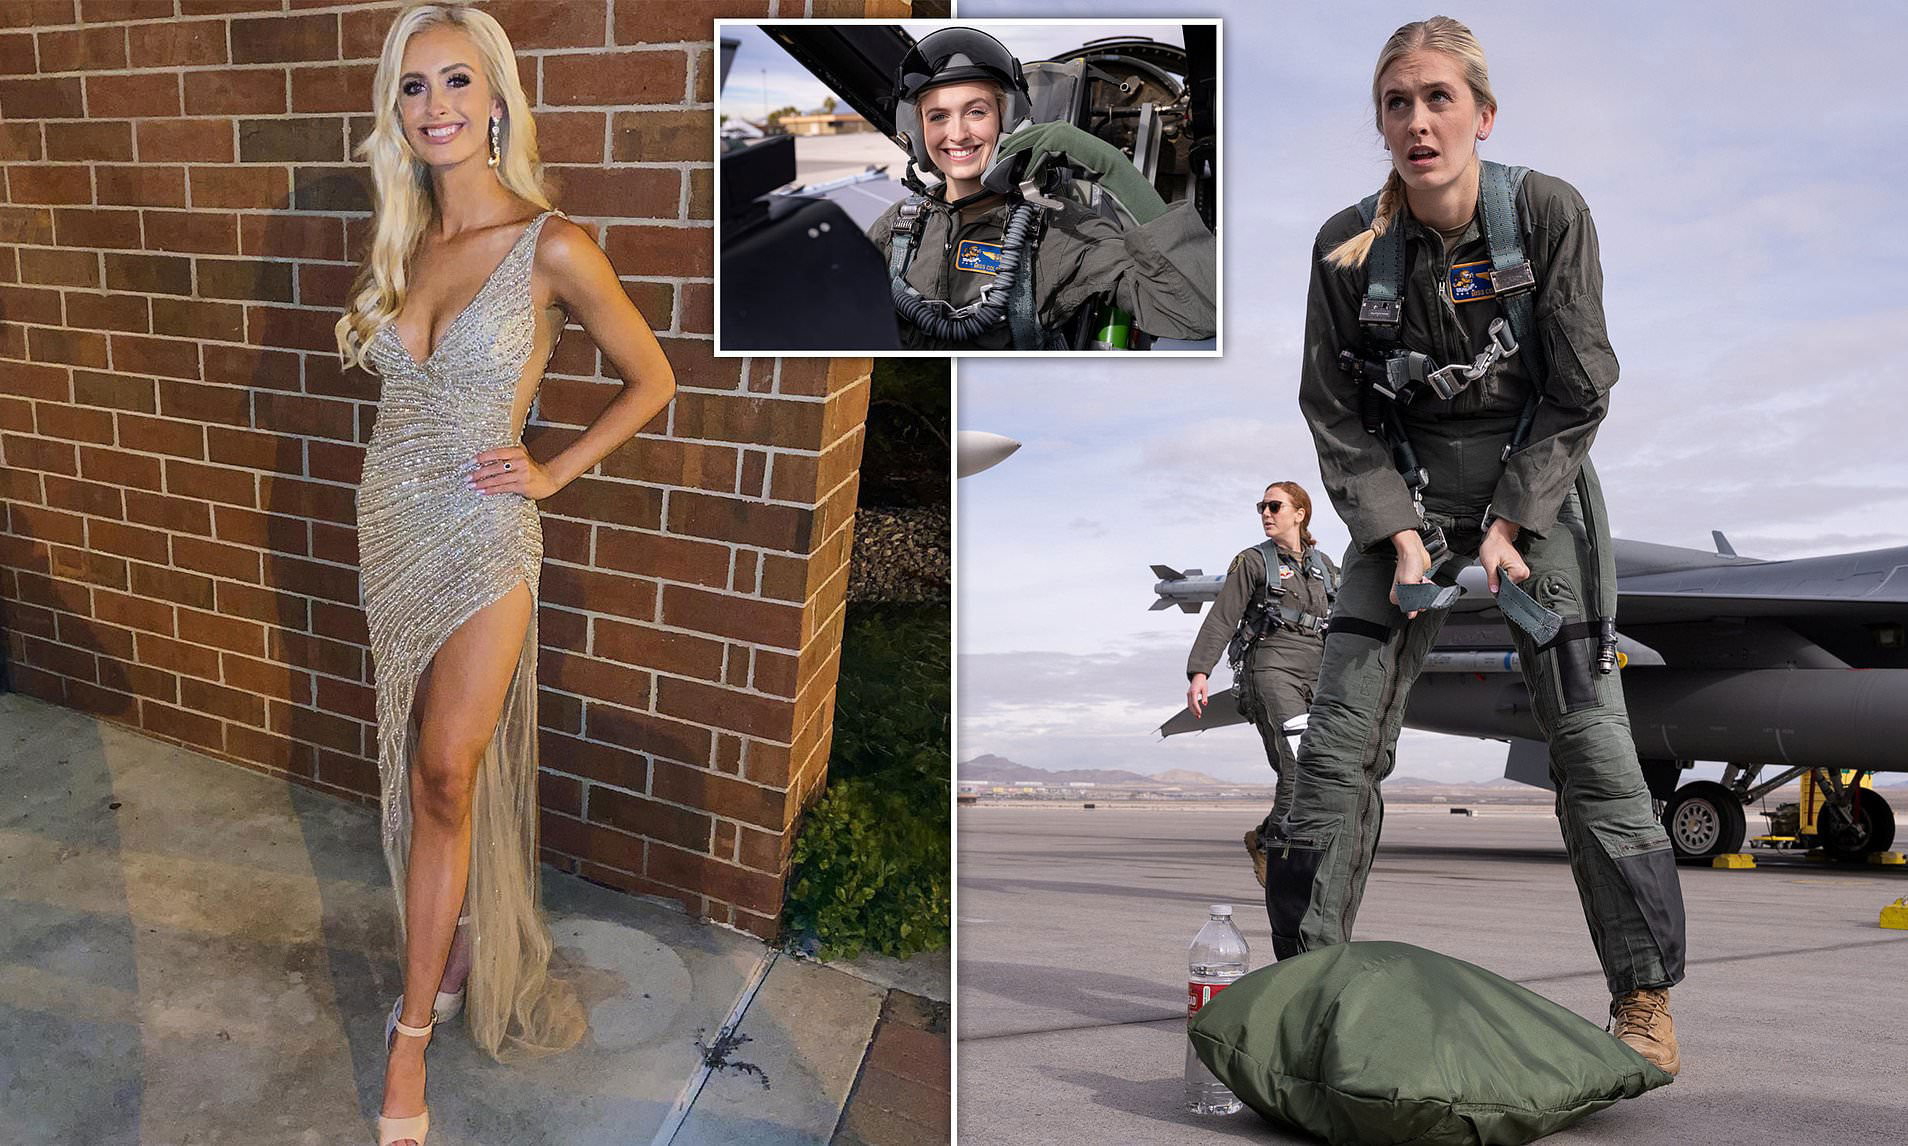 US air force fighter pilot, 22, training to be a Top Gun is also vying ...